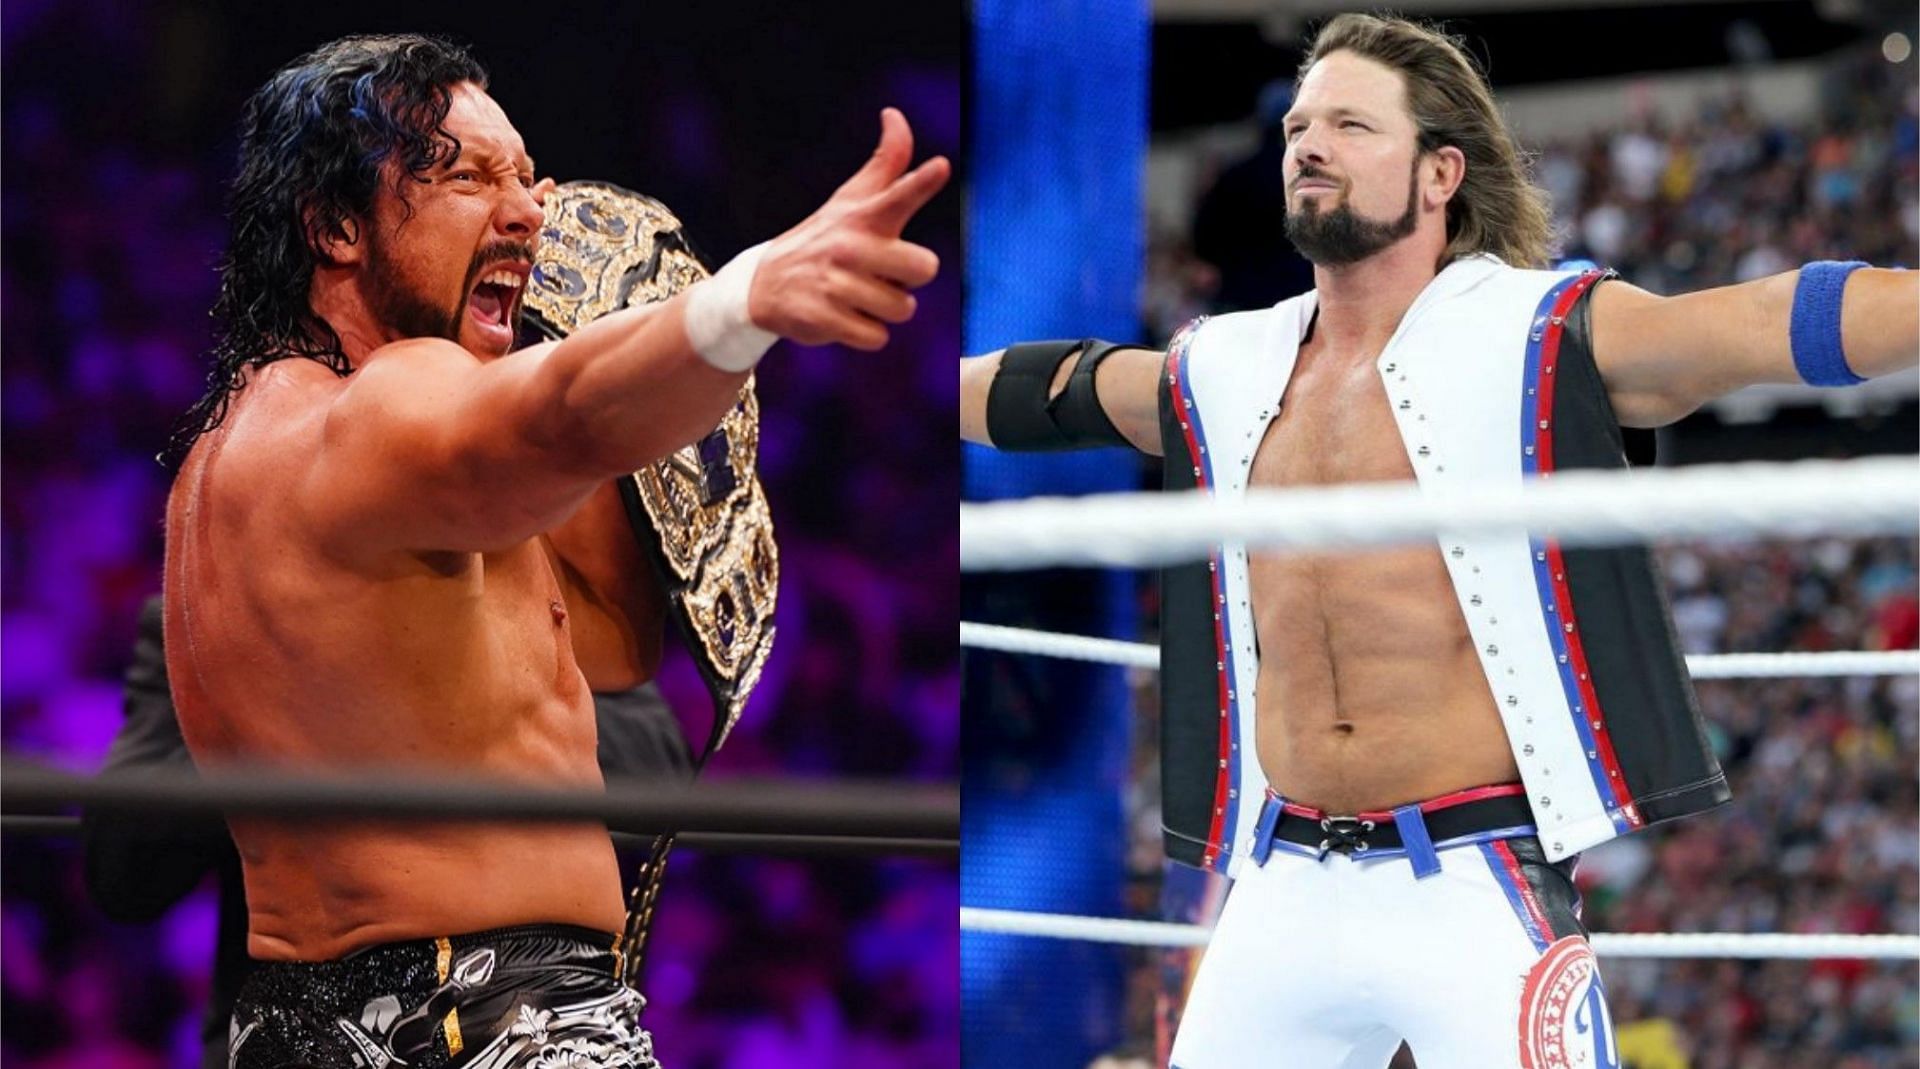 Kenny Omega (left) and AJ Styles (right)